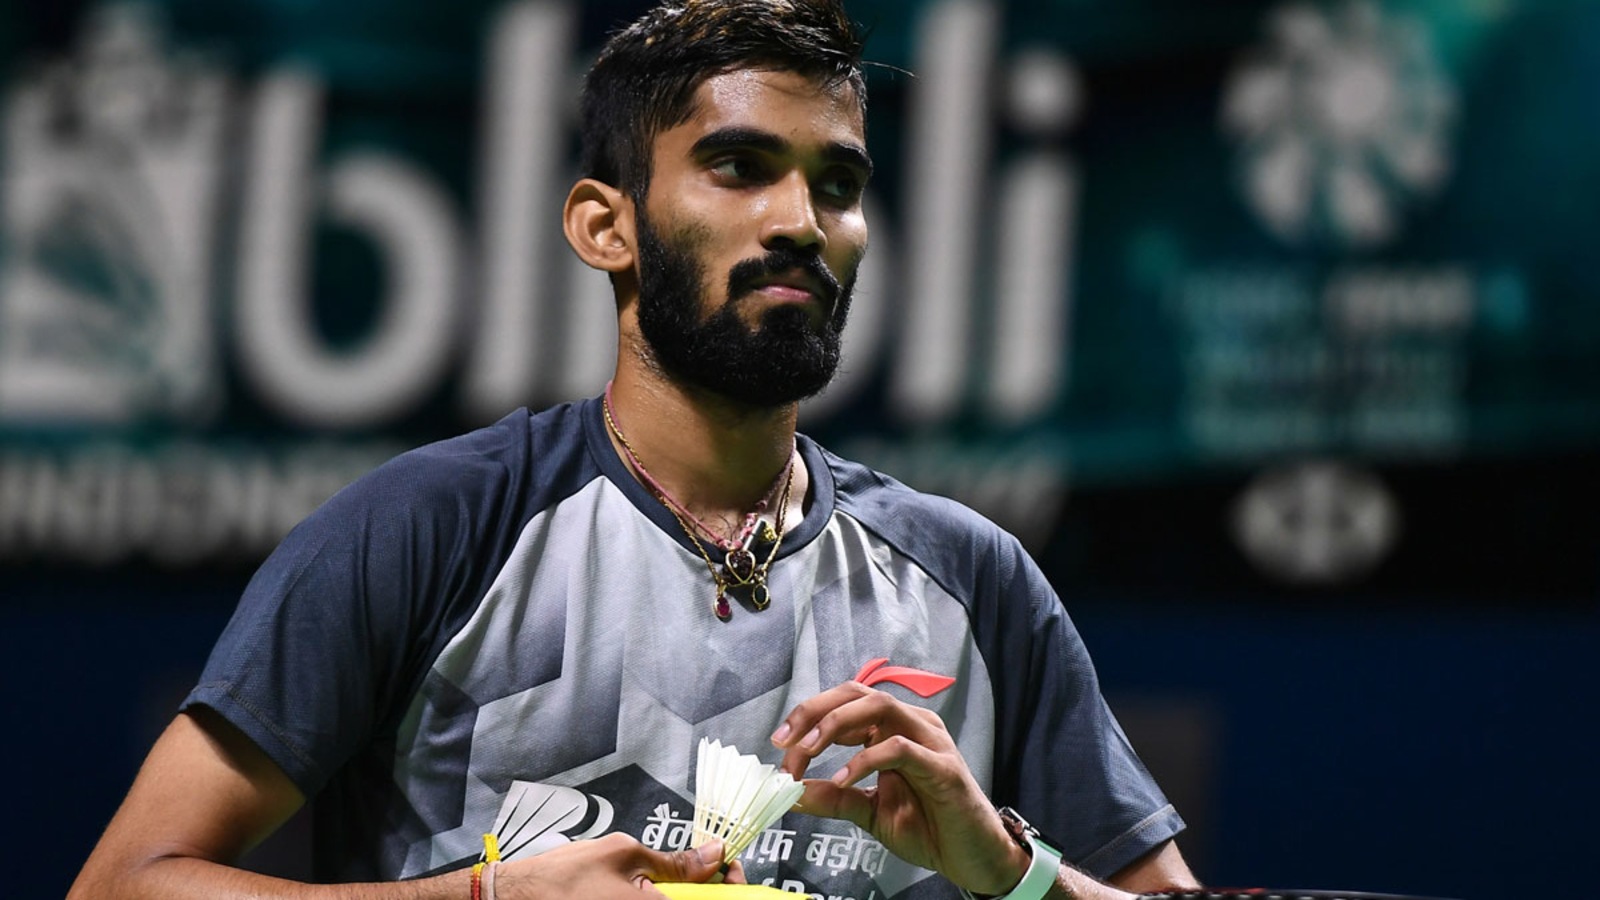 BWF World Tour Finals Kidambi Srikanth loses to Lee Zii Jia, bows out of tournament